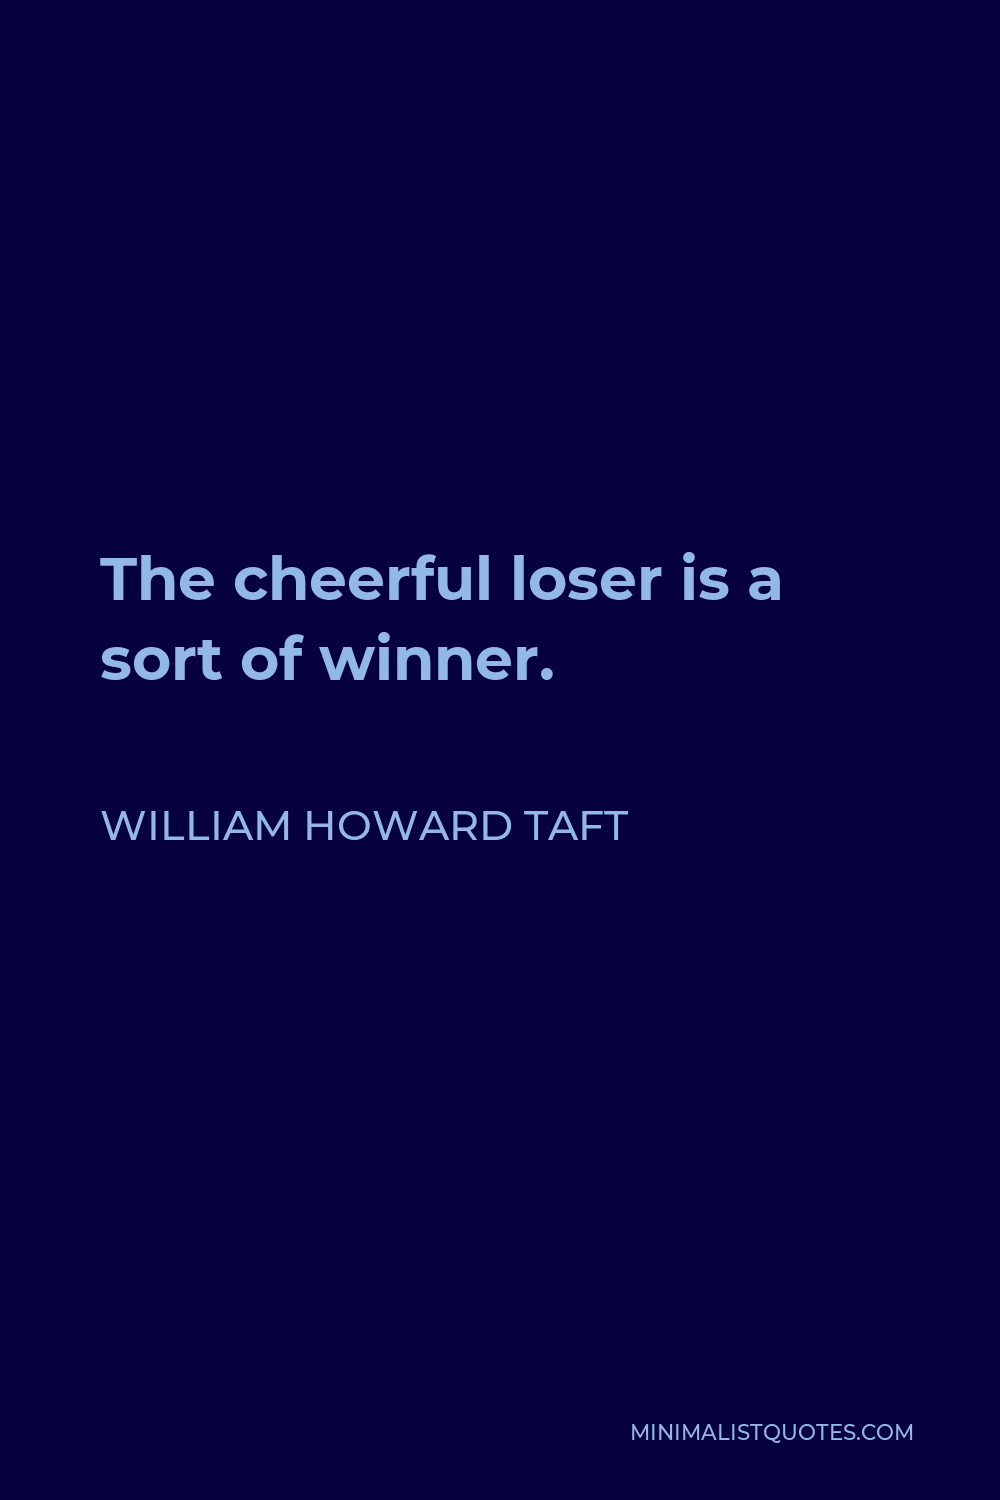 William Howard Taft Quote - The cheerful loser is a sort of winner.